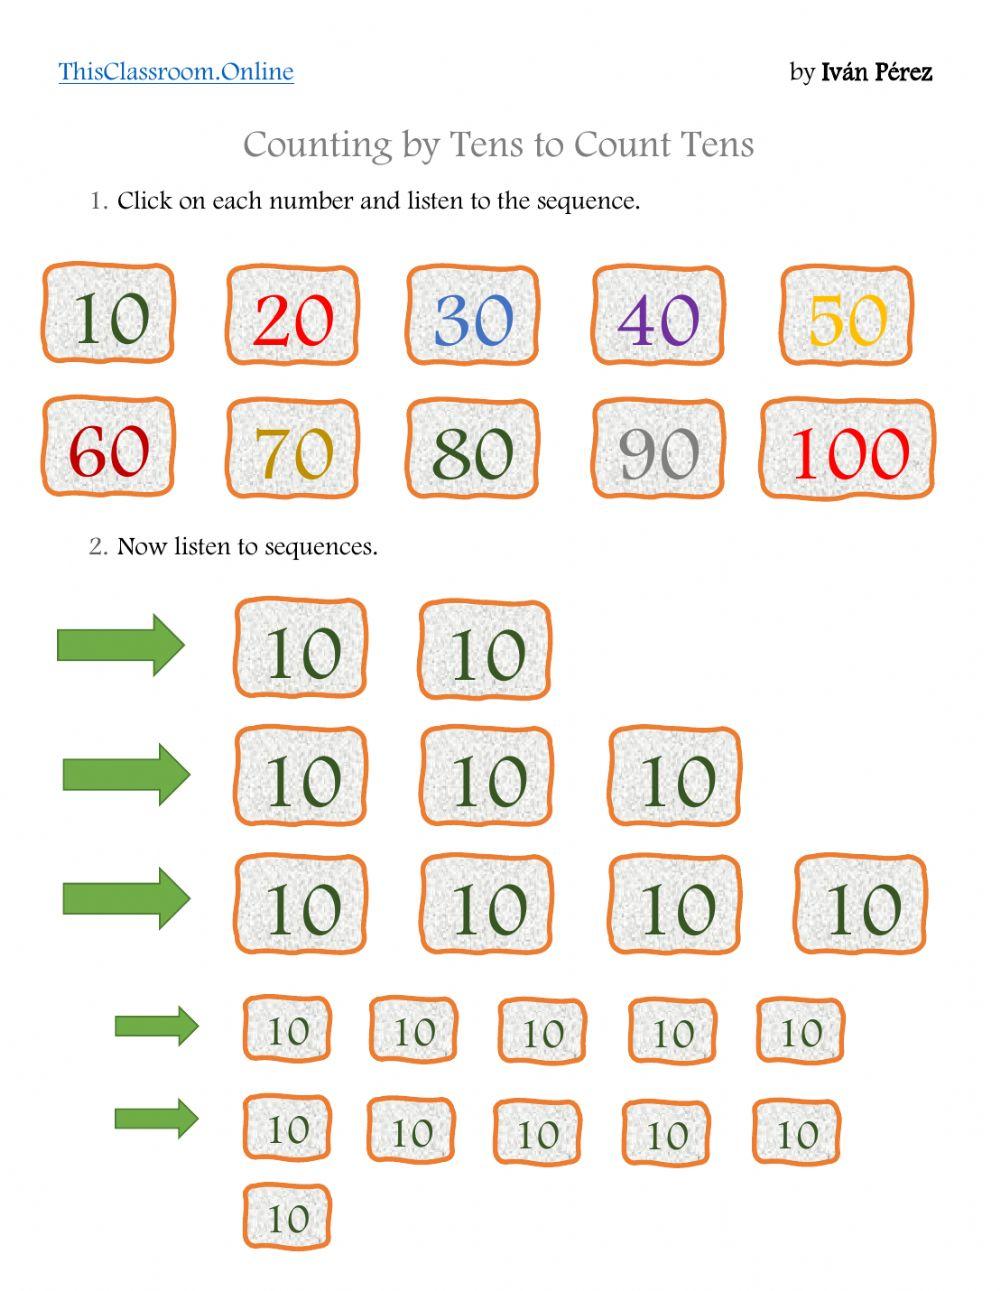 Counting by Tens to Add Tens and Ones